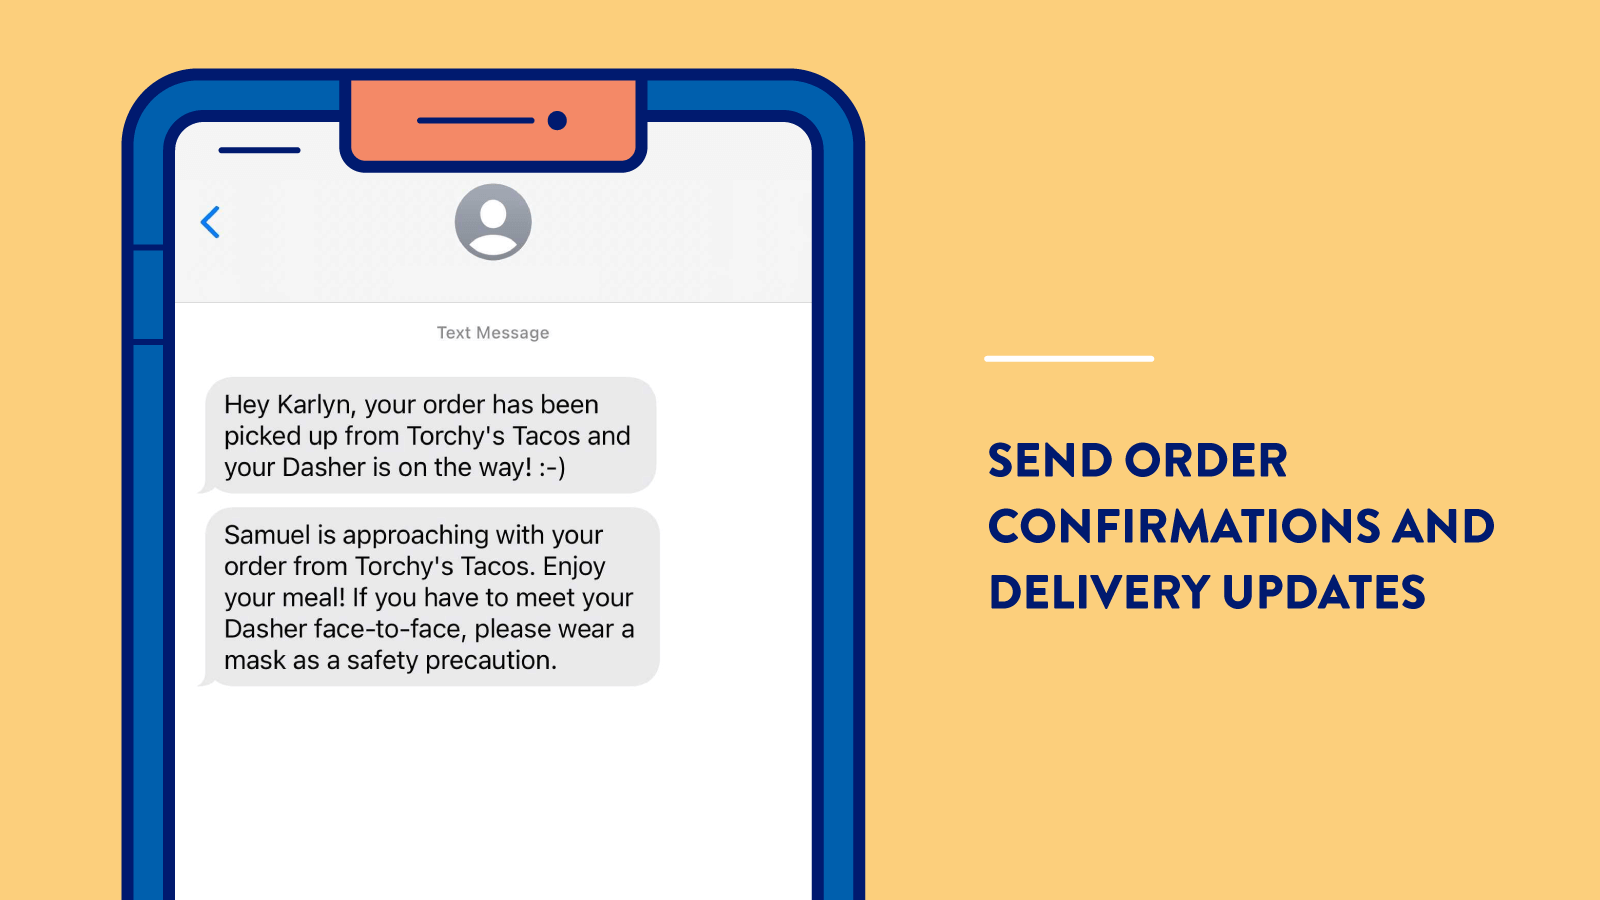 Personalization tip: Send Order Confirmations and Delivery Updates